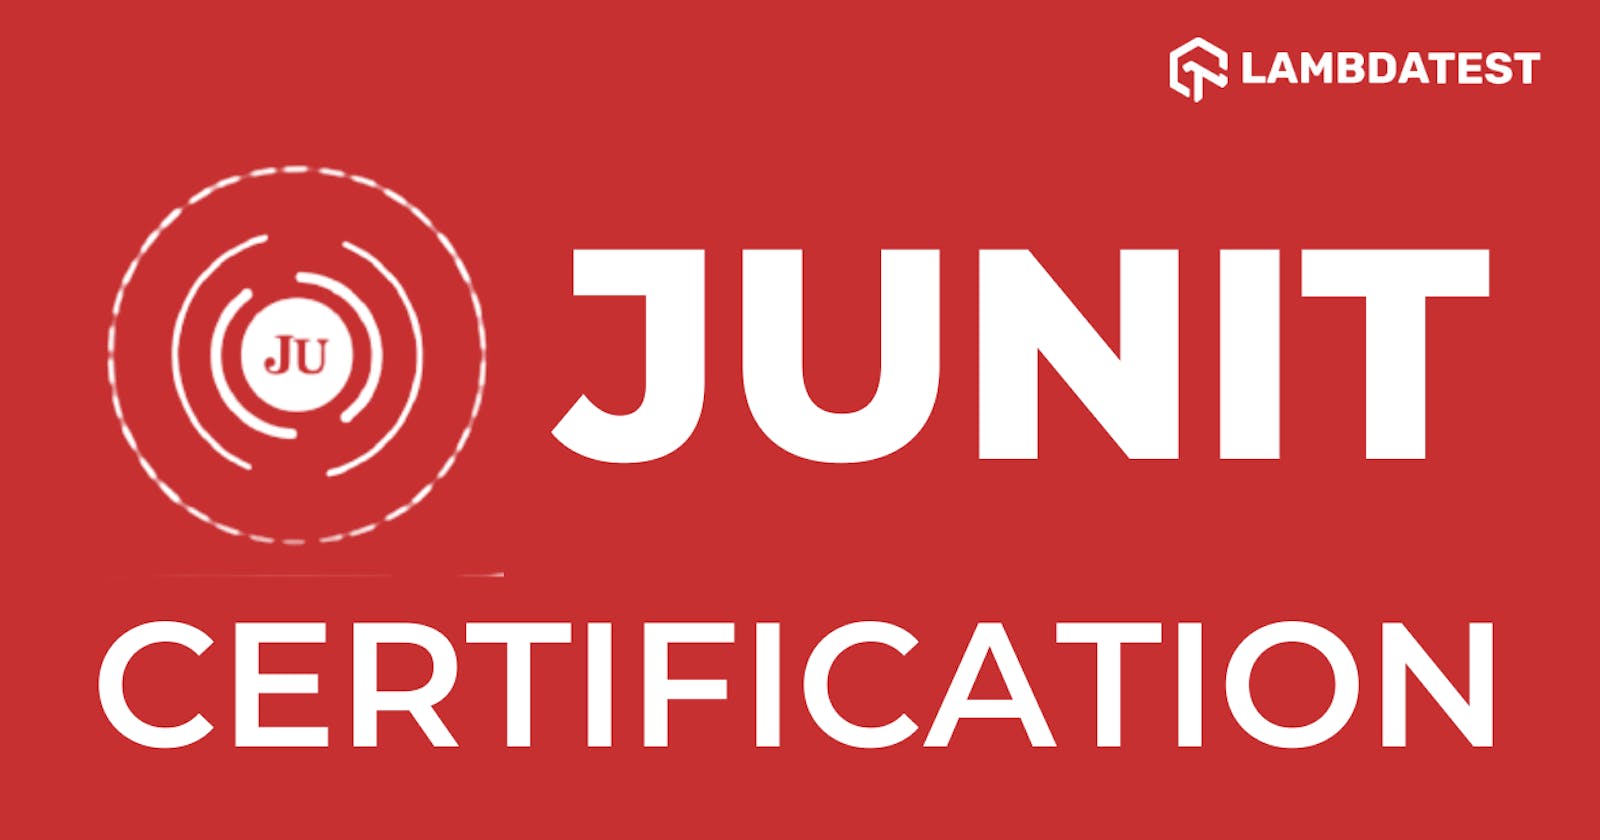 JUnit Certification: Evaluate Your
Automation Testing Skills